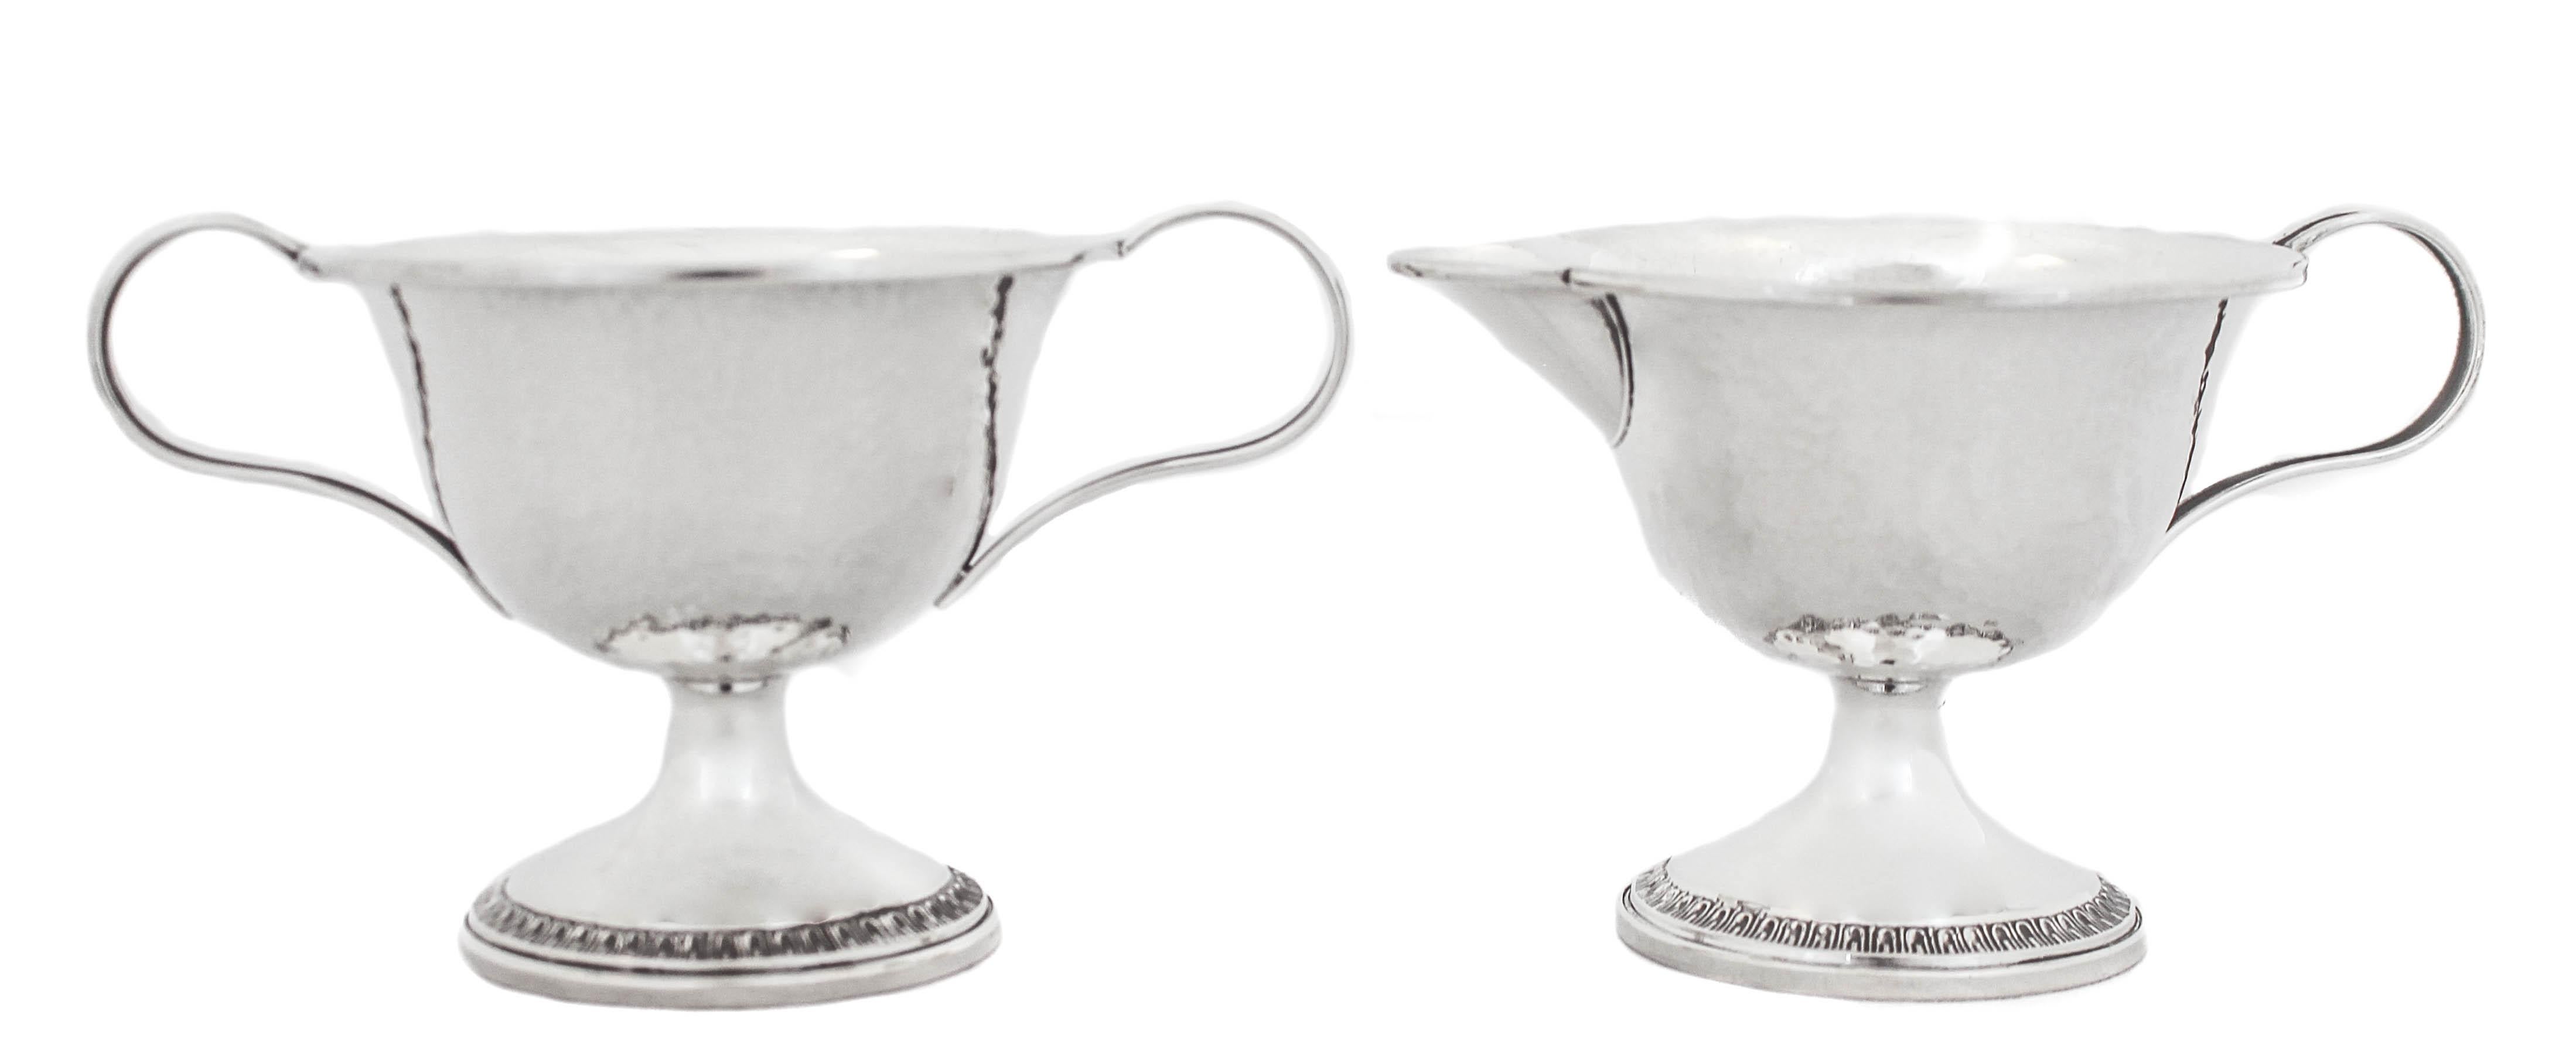 We are thrilled to offer you this sterling silver cream & sugar set in the original box it was presented. Designed by the Webster Silver Company, these pieces have a hand hammered finish and are in the Arts and Crafts style of the early 20th